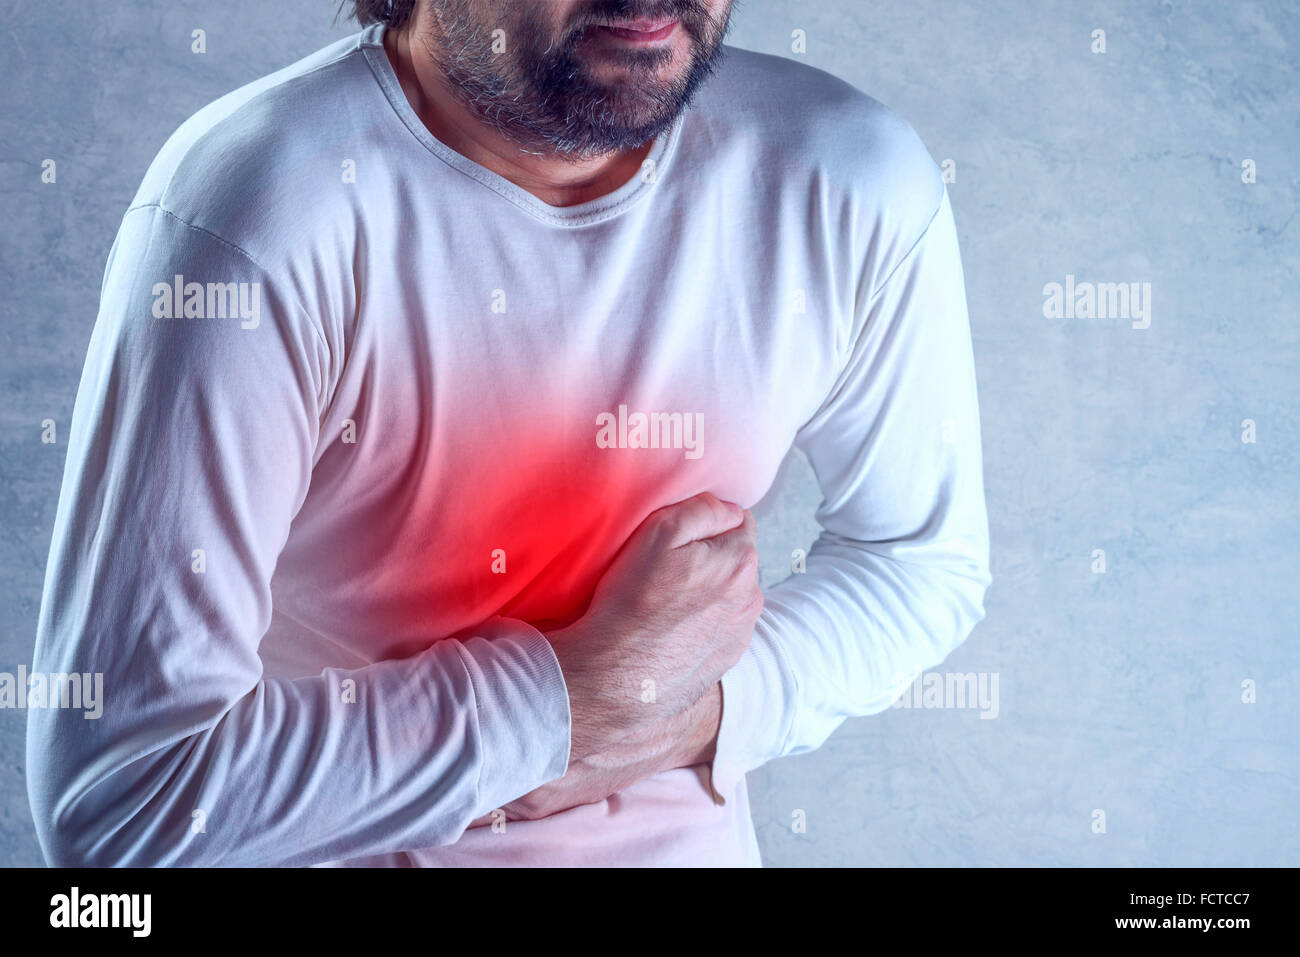 Severe abdominal pain, man suffering from stomach ache, holding his belly and having painful cramps. Stock Photo